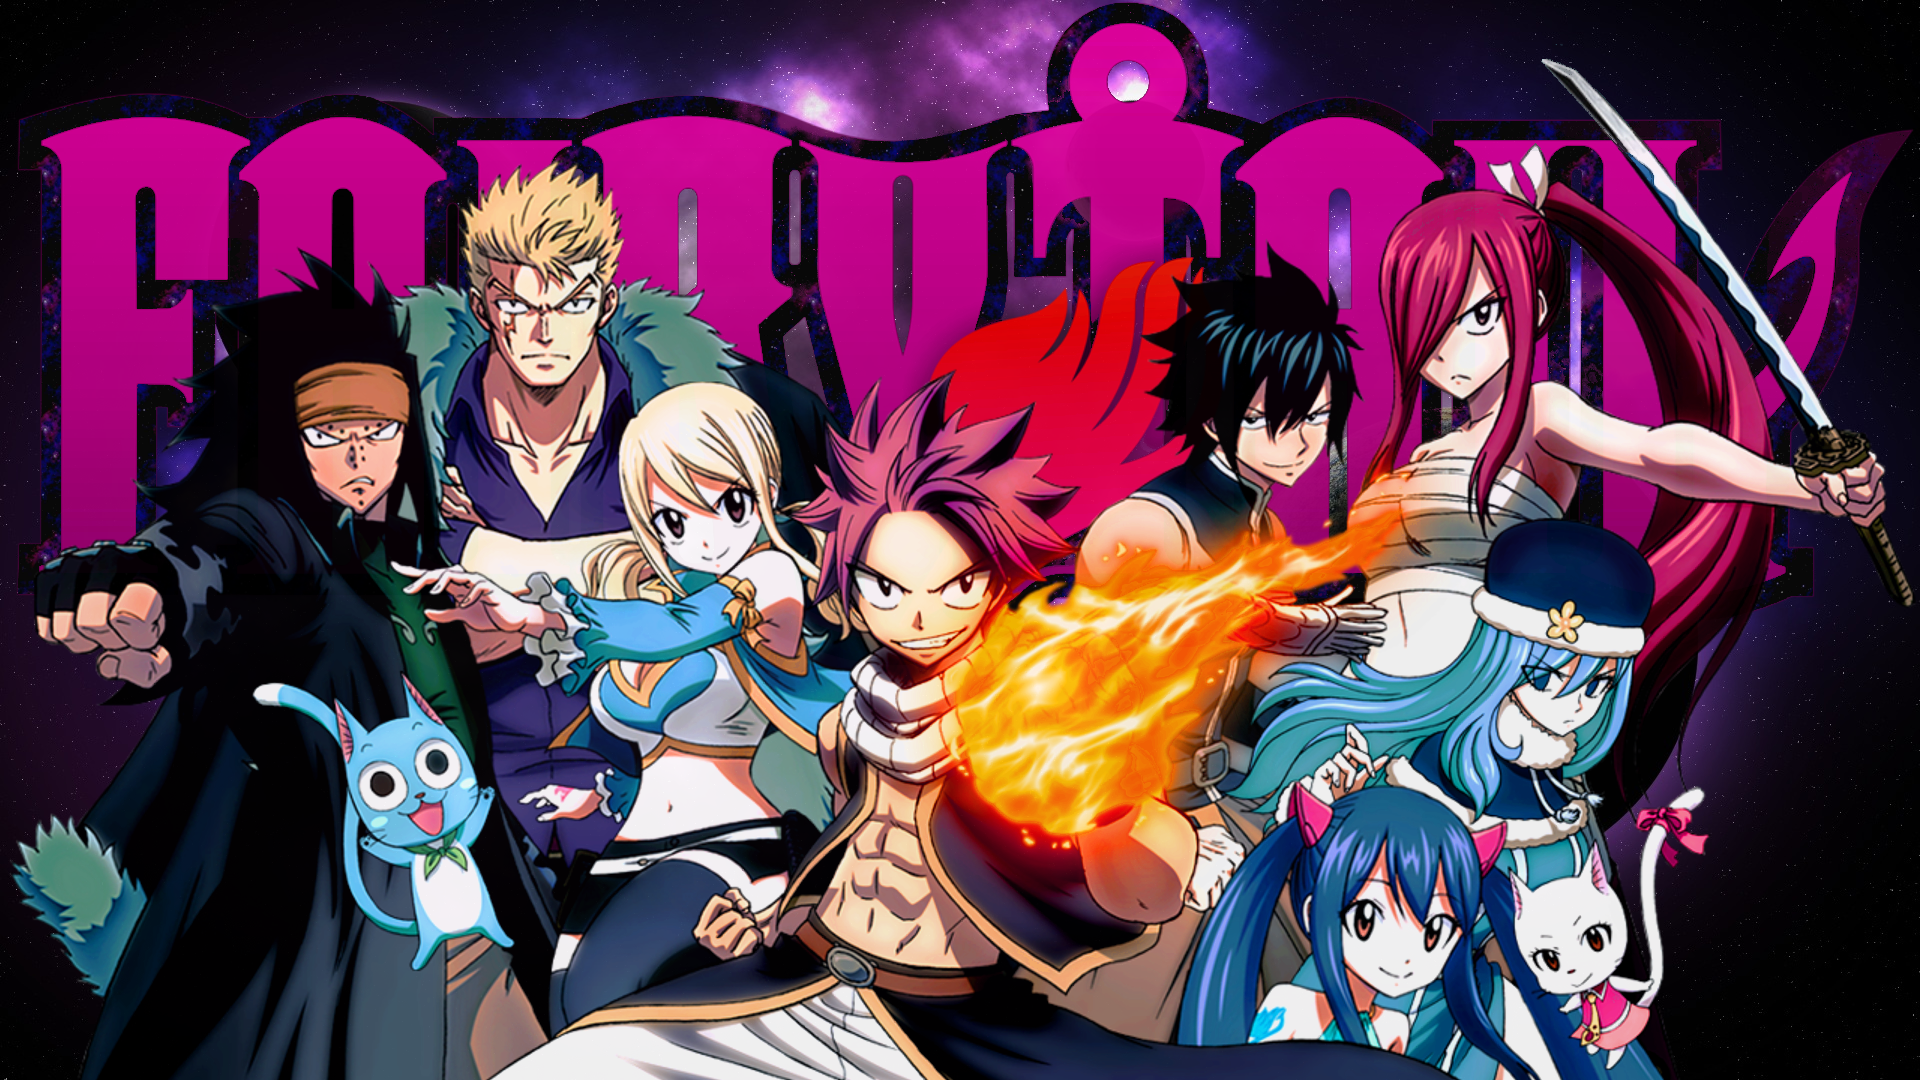 Erza Scarlet Fairy Tail Gray Fullbuster Lucy Heartfilia Natsu Dragneel Wendy Marvell 1920x1080